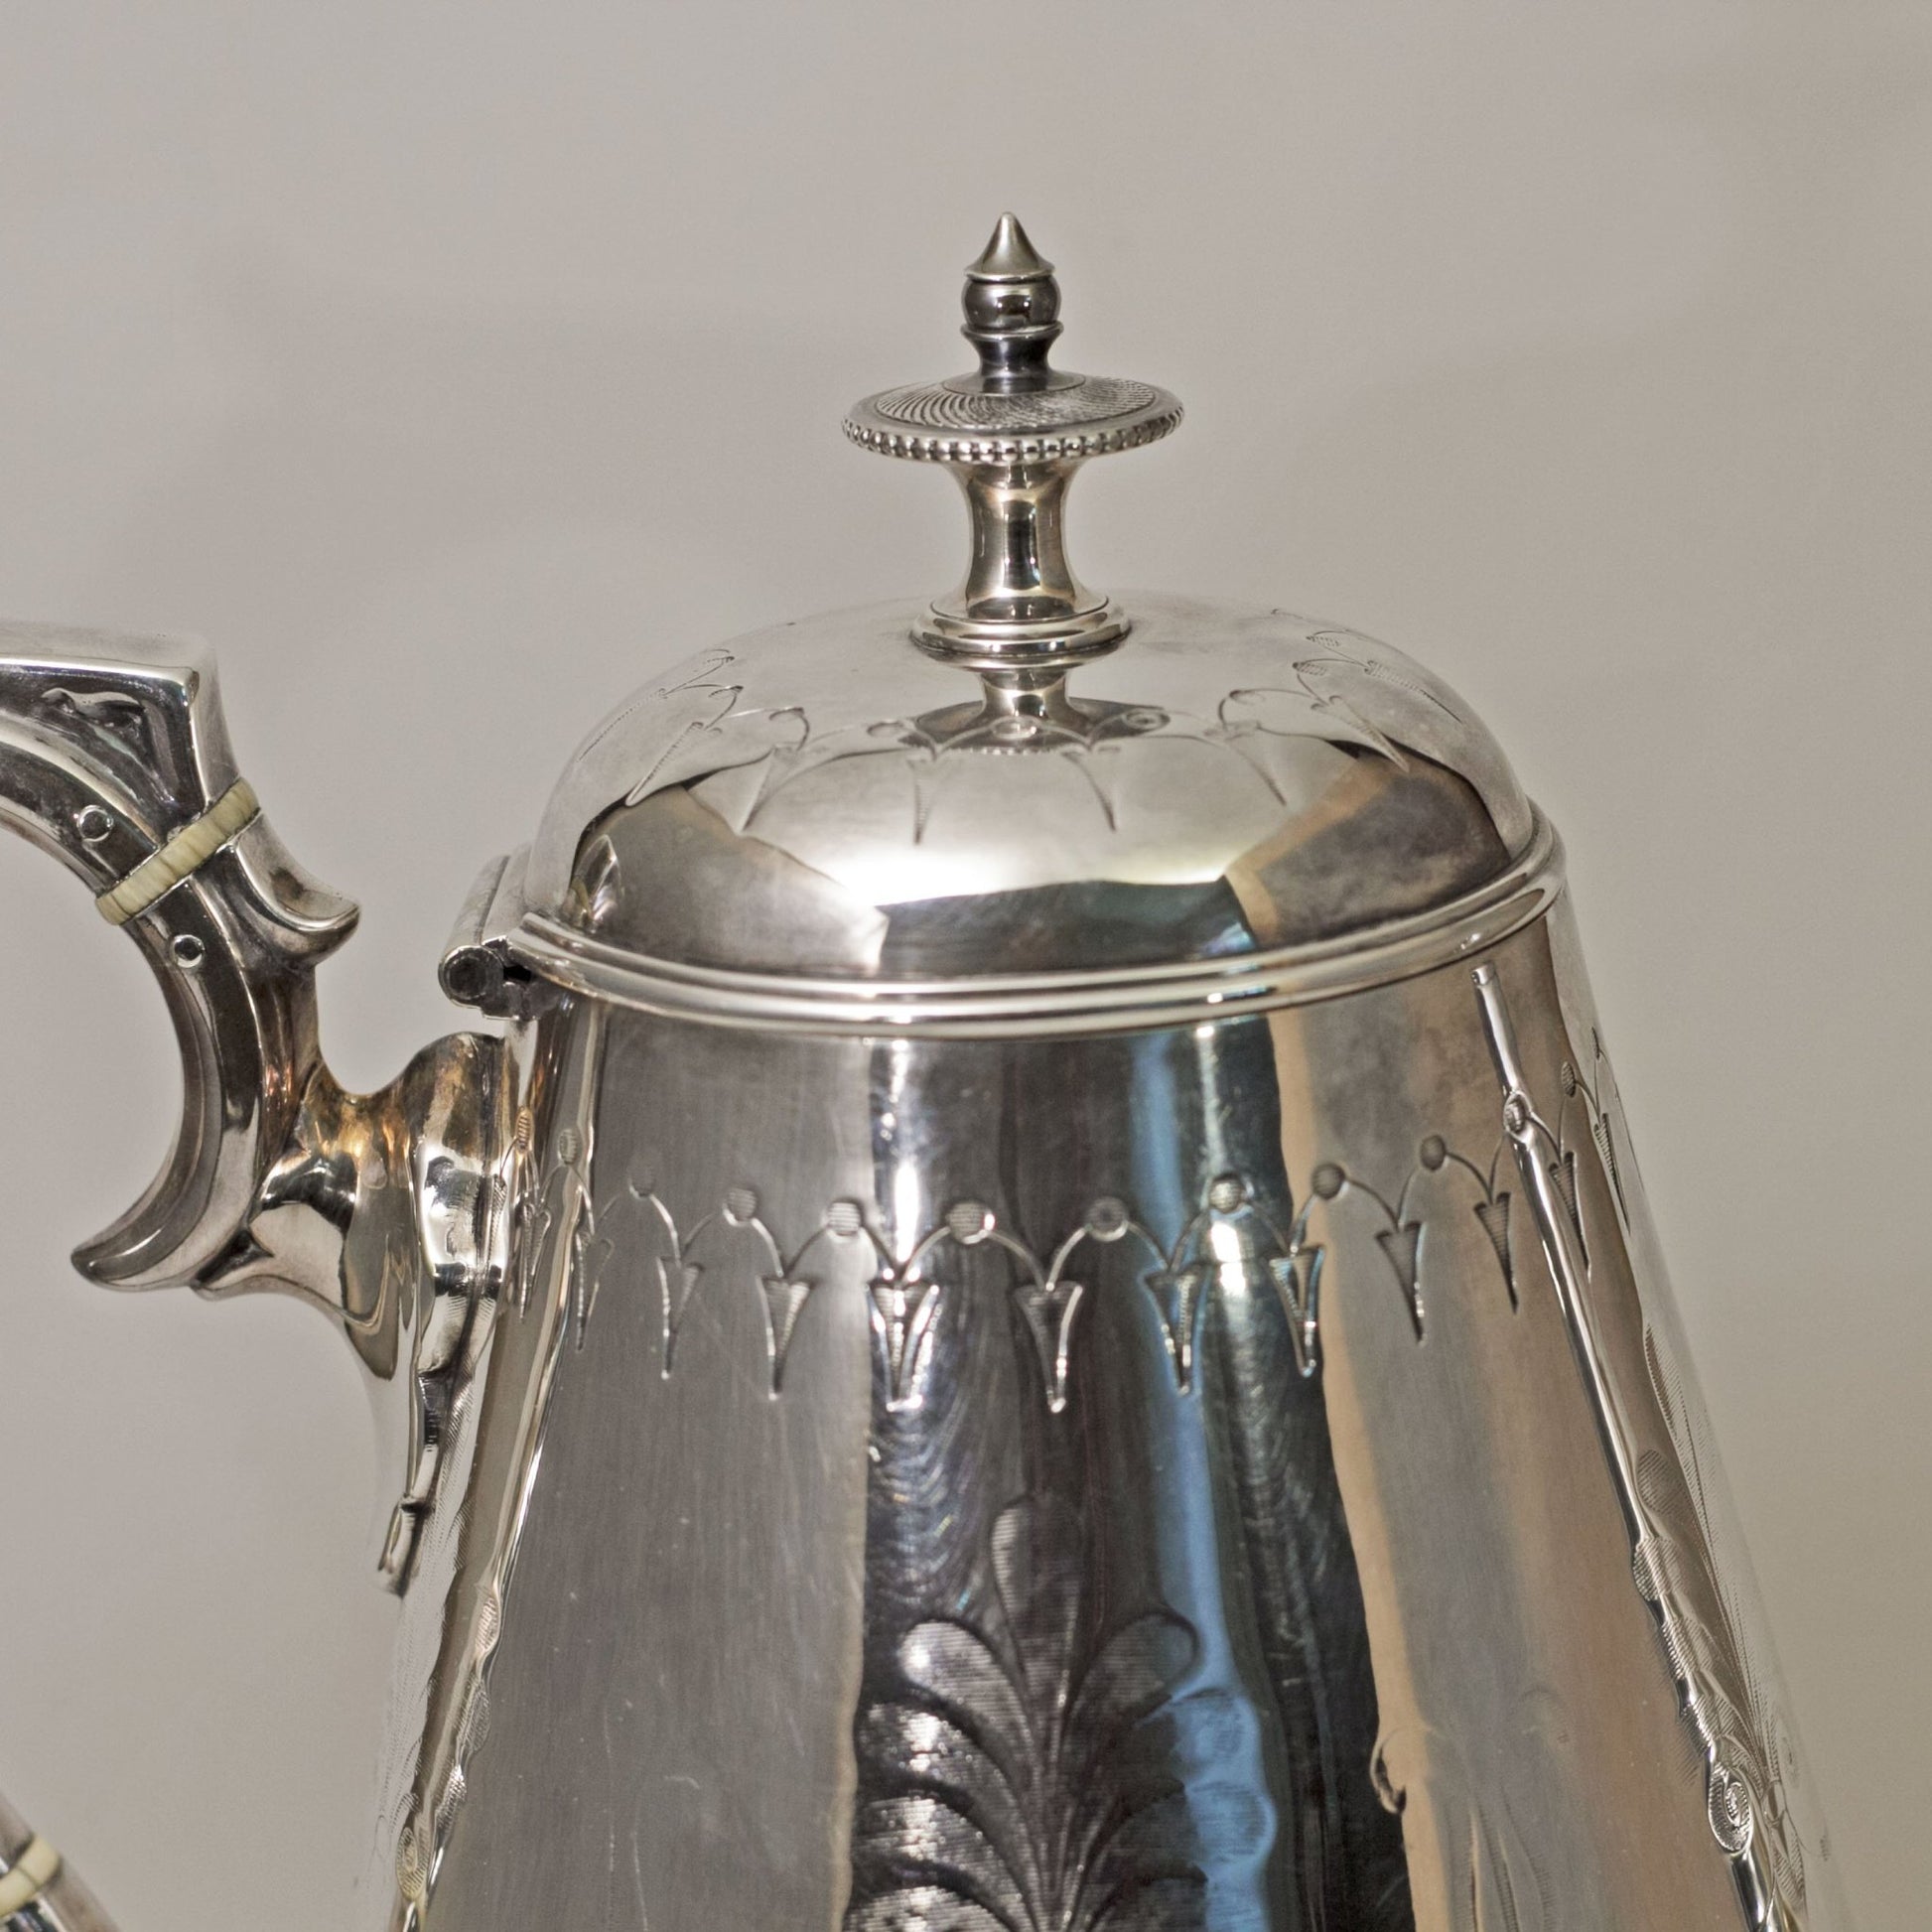 Electroplated Victorian COFFEE POT Engraved Circa 1860 to 1910